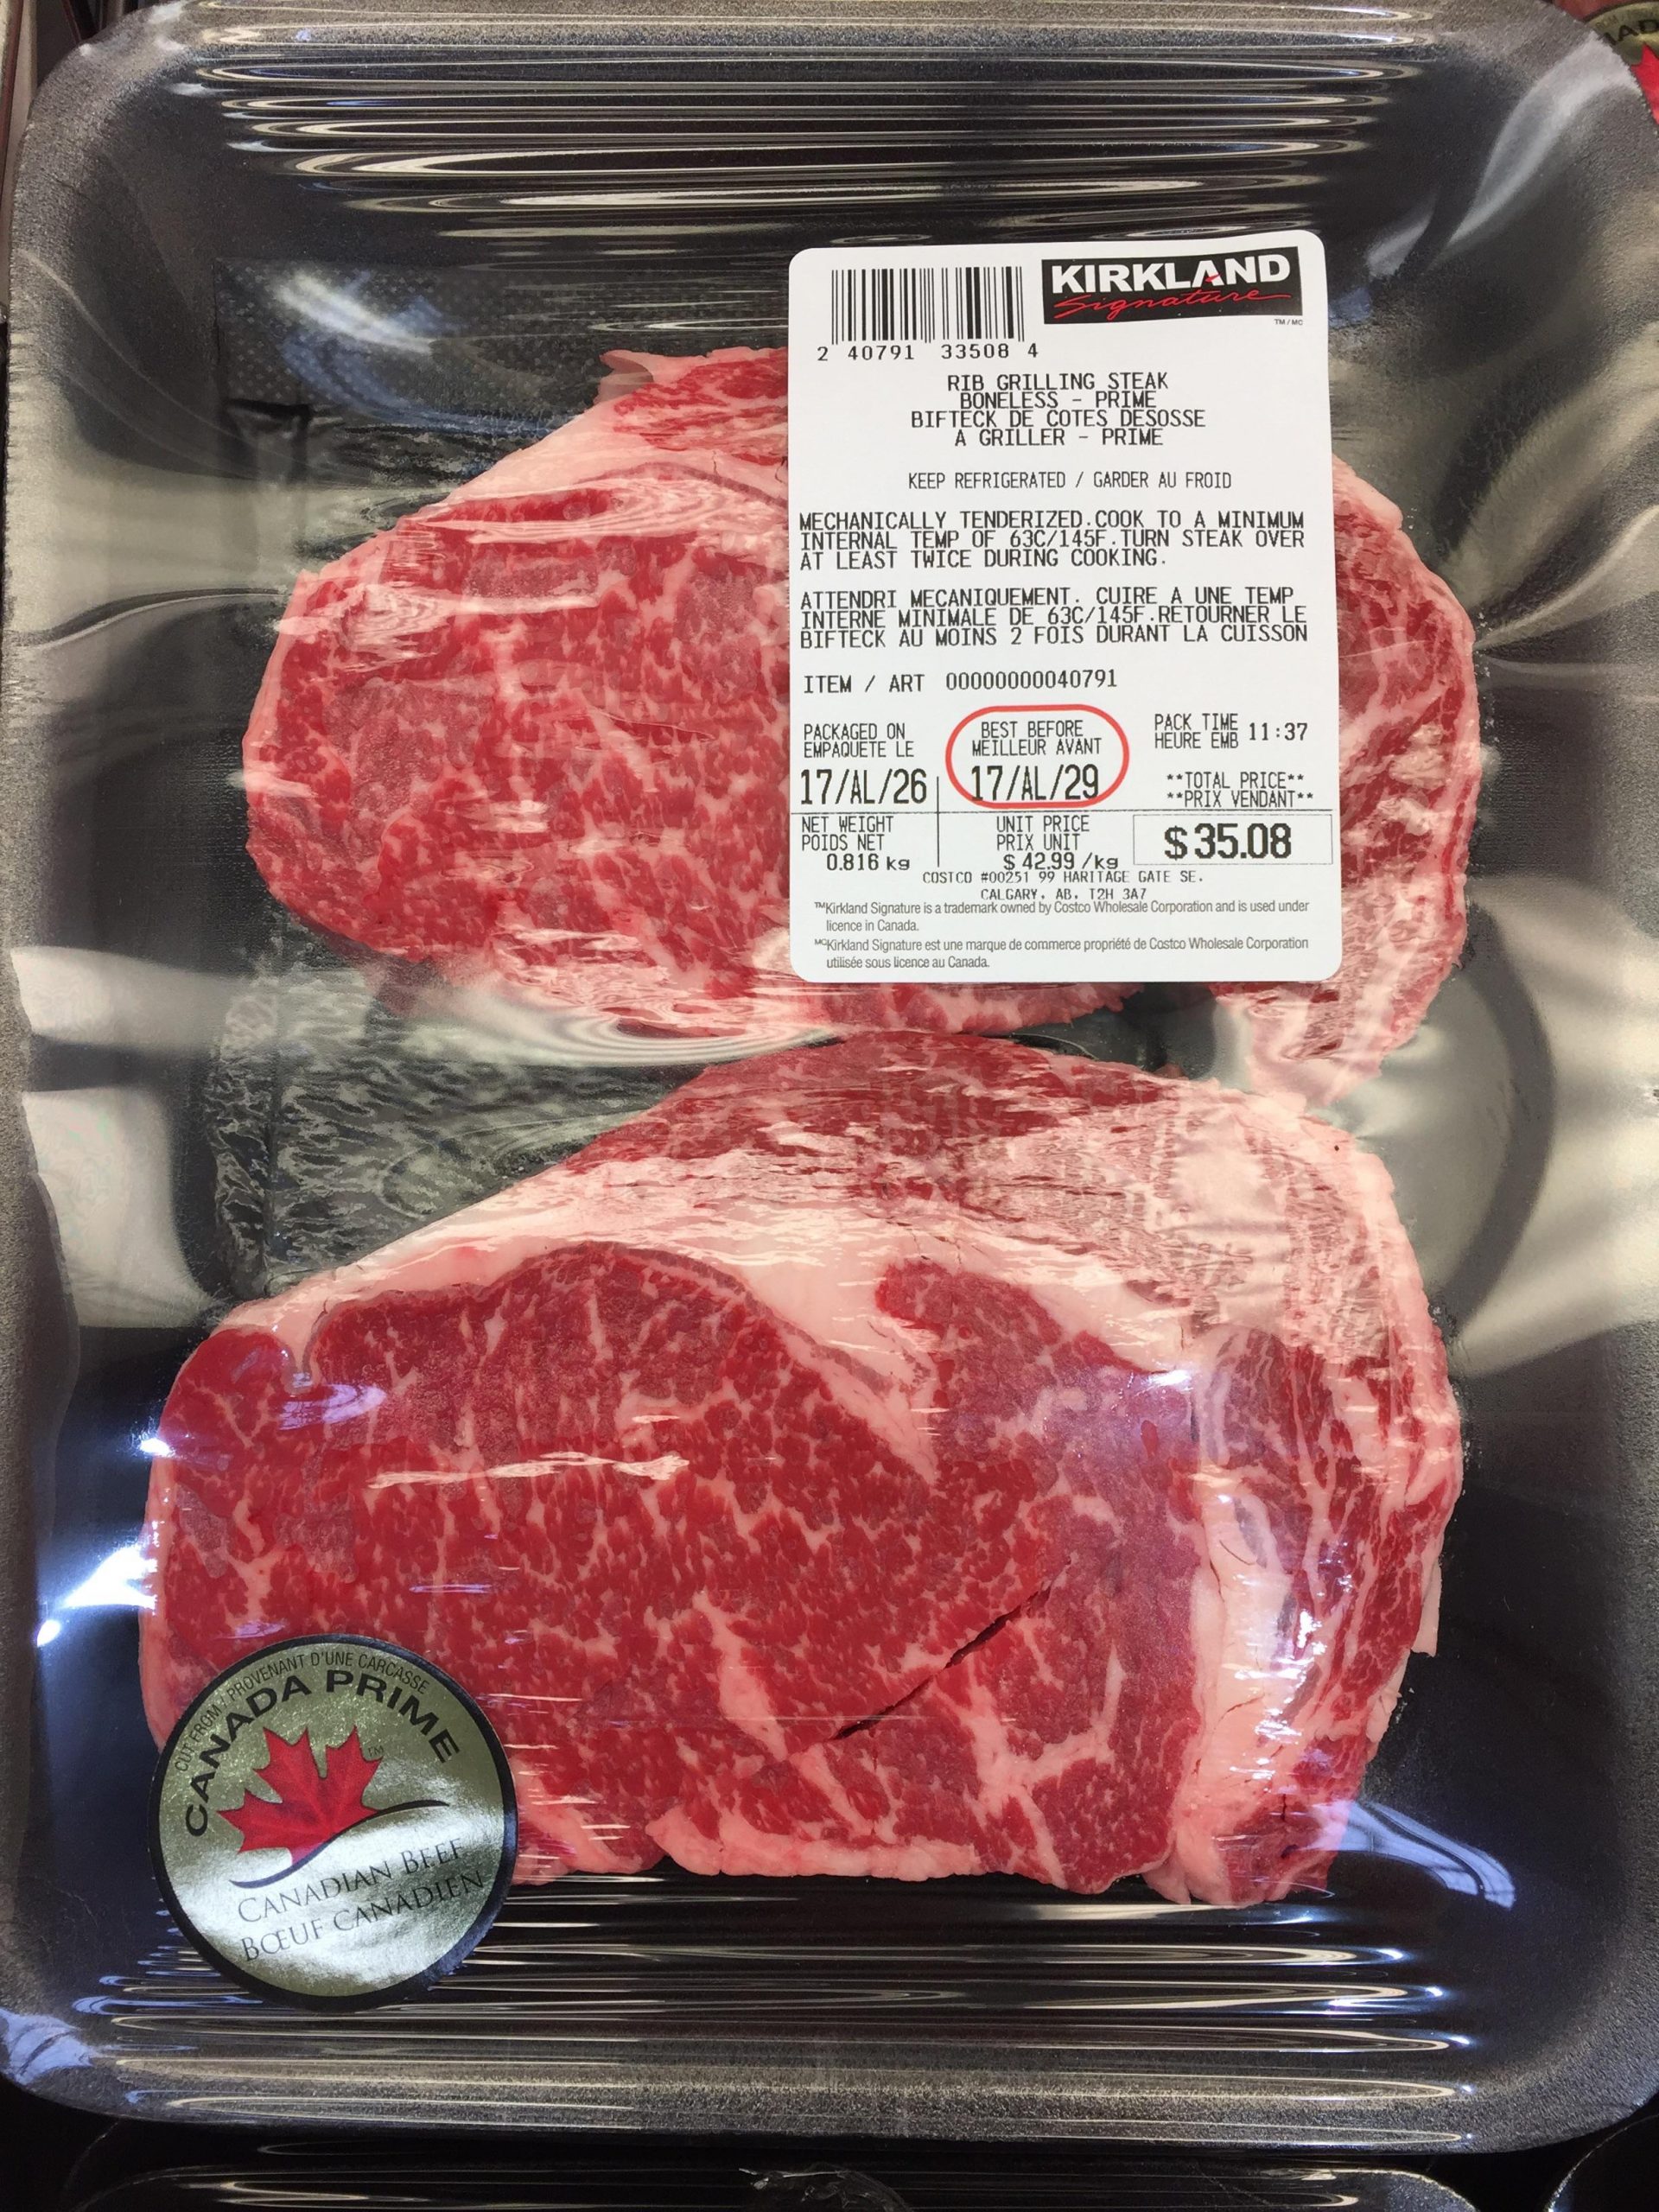 Does your Costco mechanically tenderize prime steaks too ...